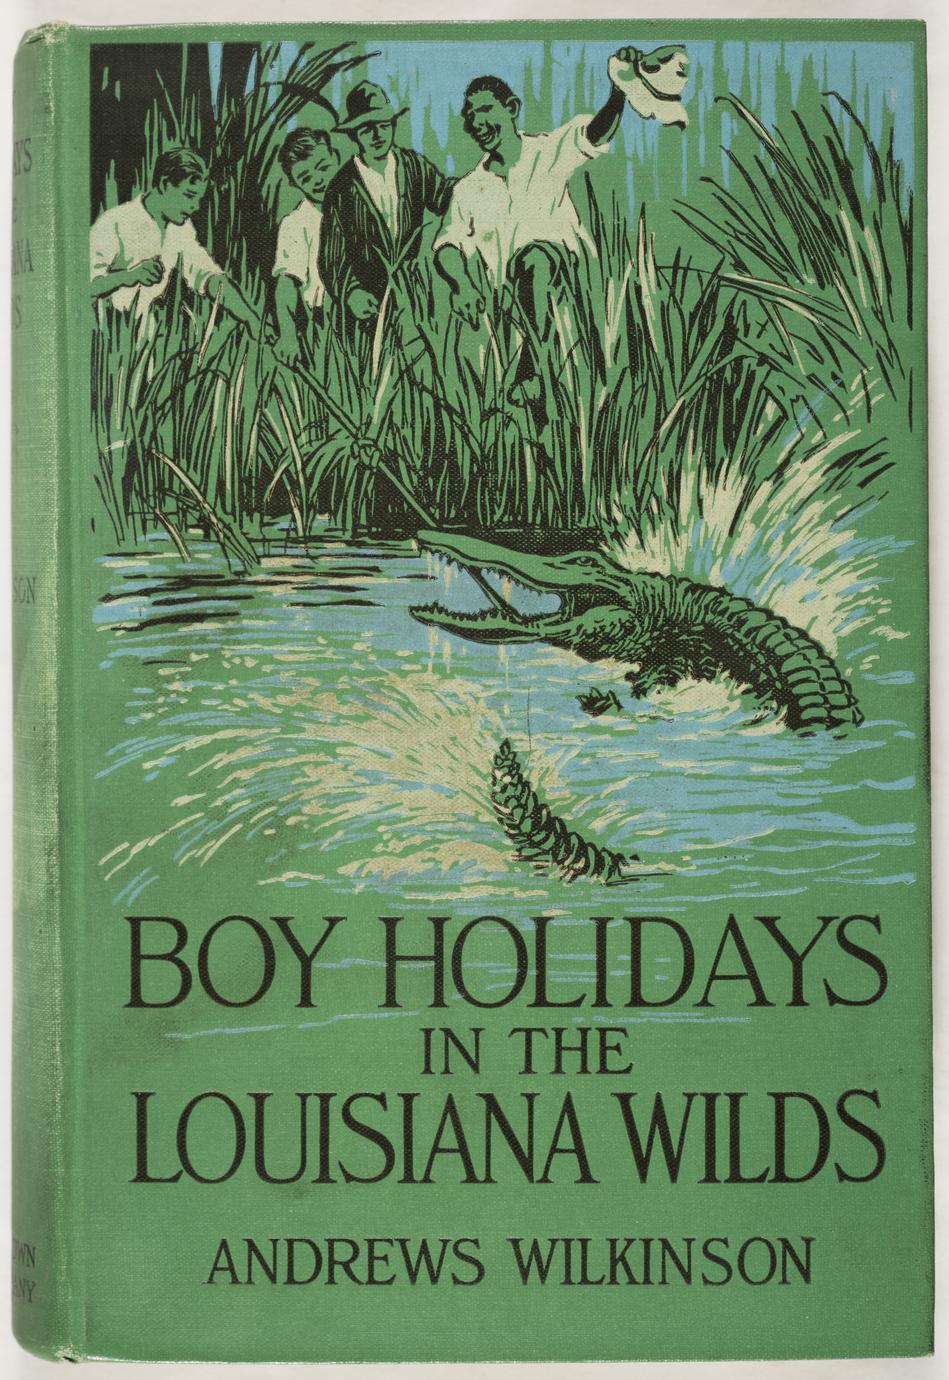 Boy holidays in the Louisiana wilds (1 of 2)